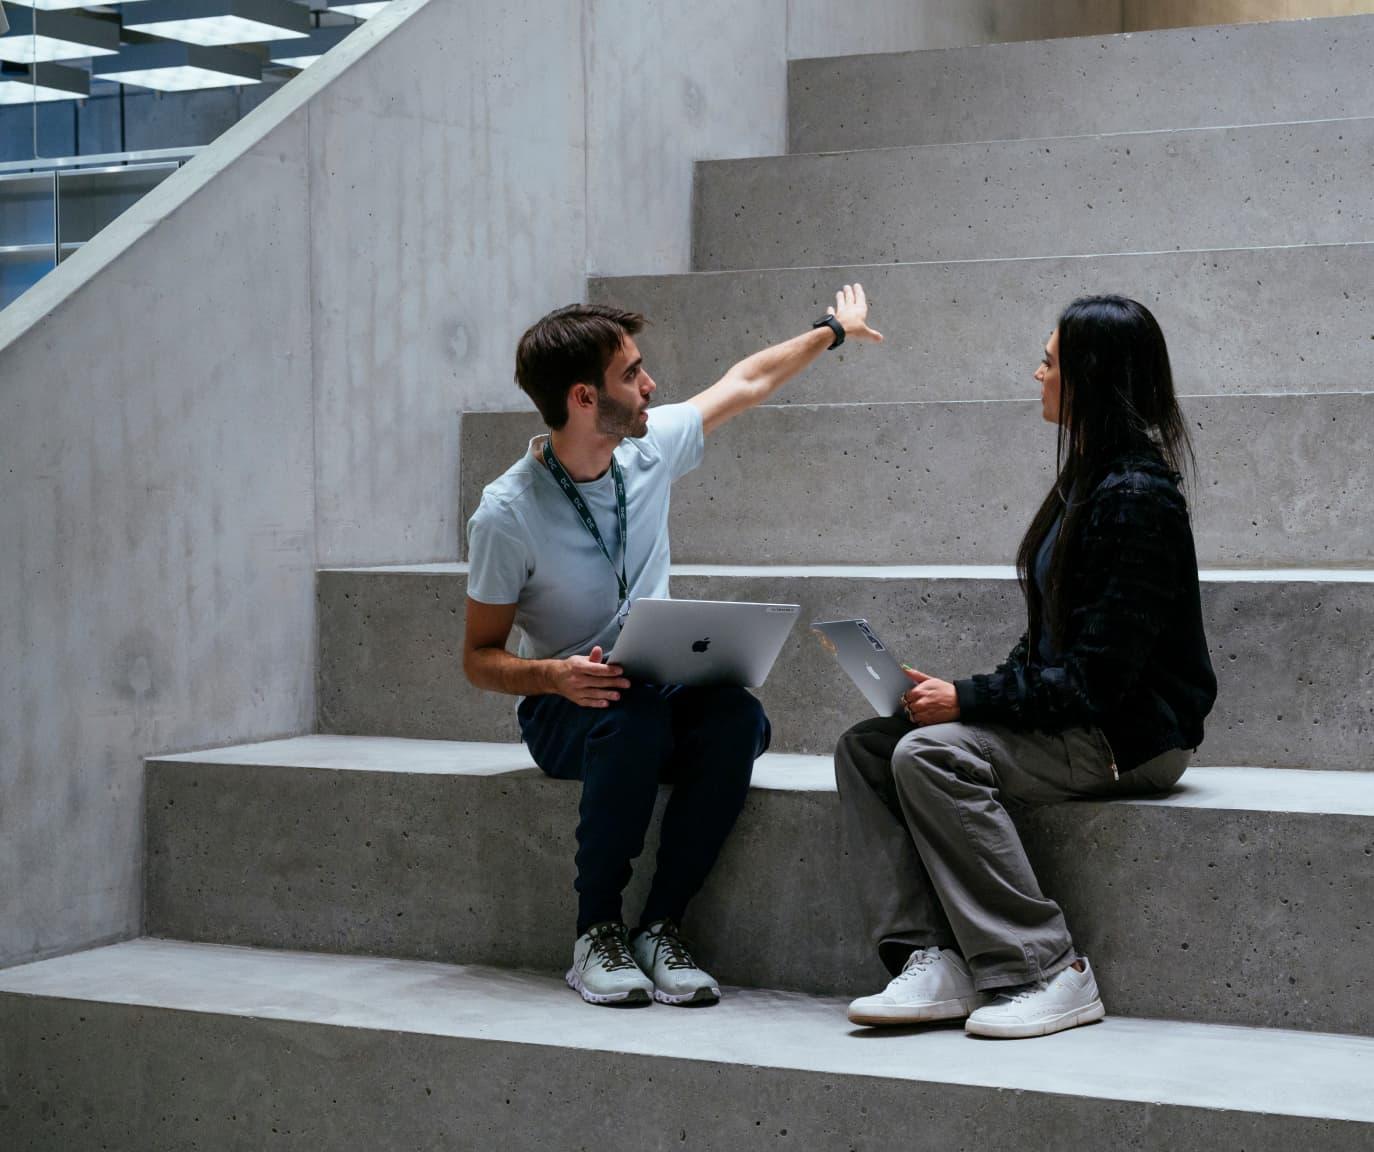 Woman and man sat on concrete steps looking at each other as the man is pointing towards the top of the steps